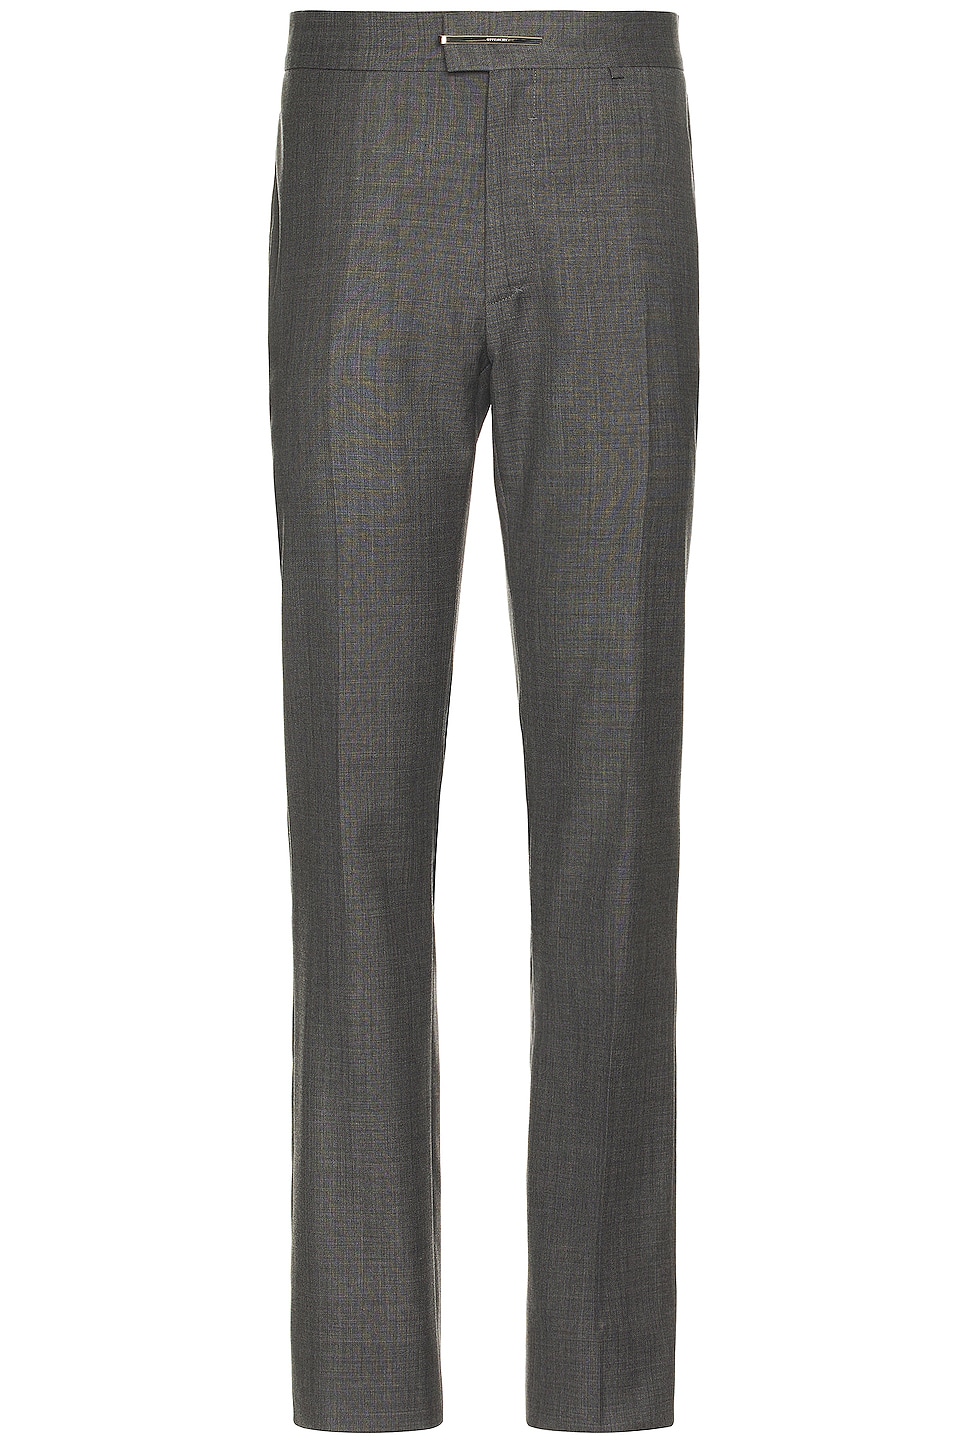 Image 1 of Givenchy Straight Fit Pants W/ Metal Clip Closure in Medium Grey